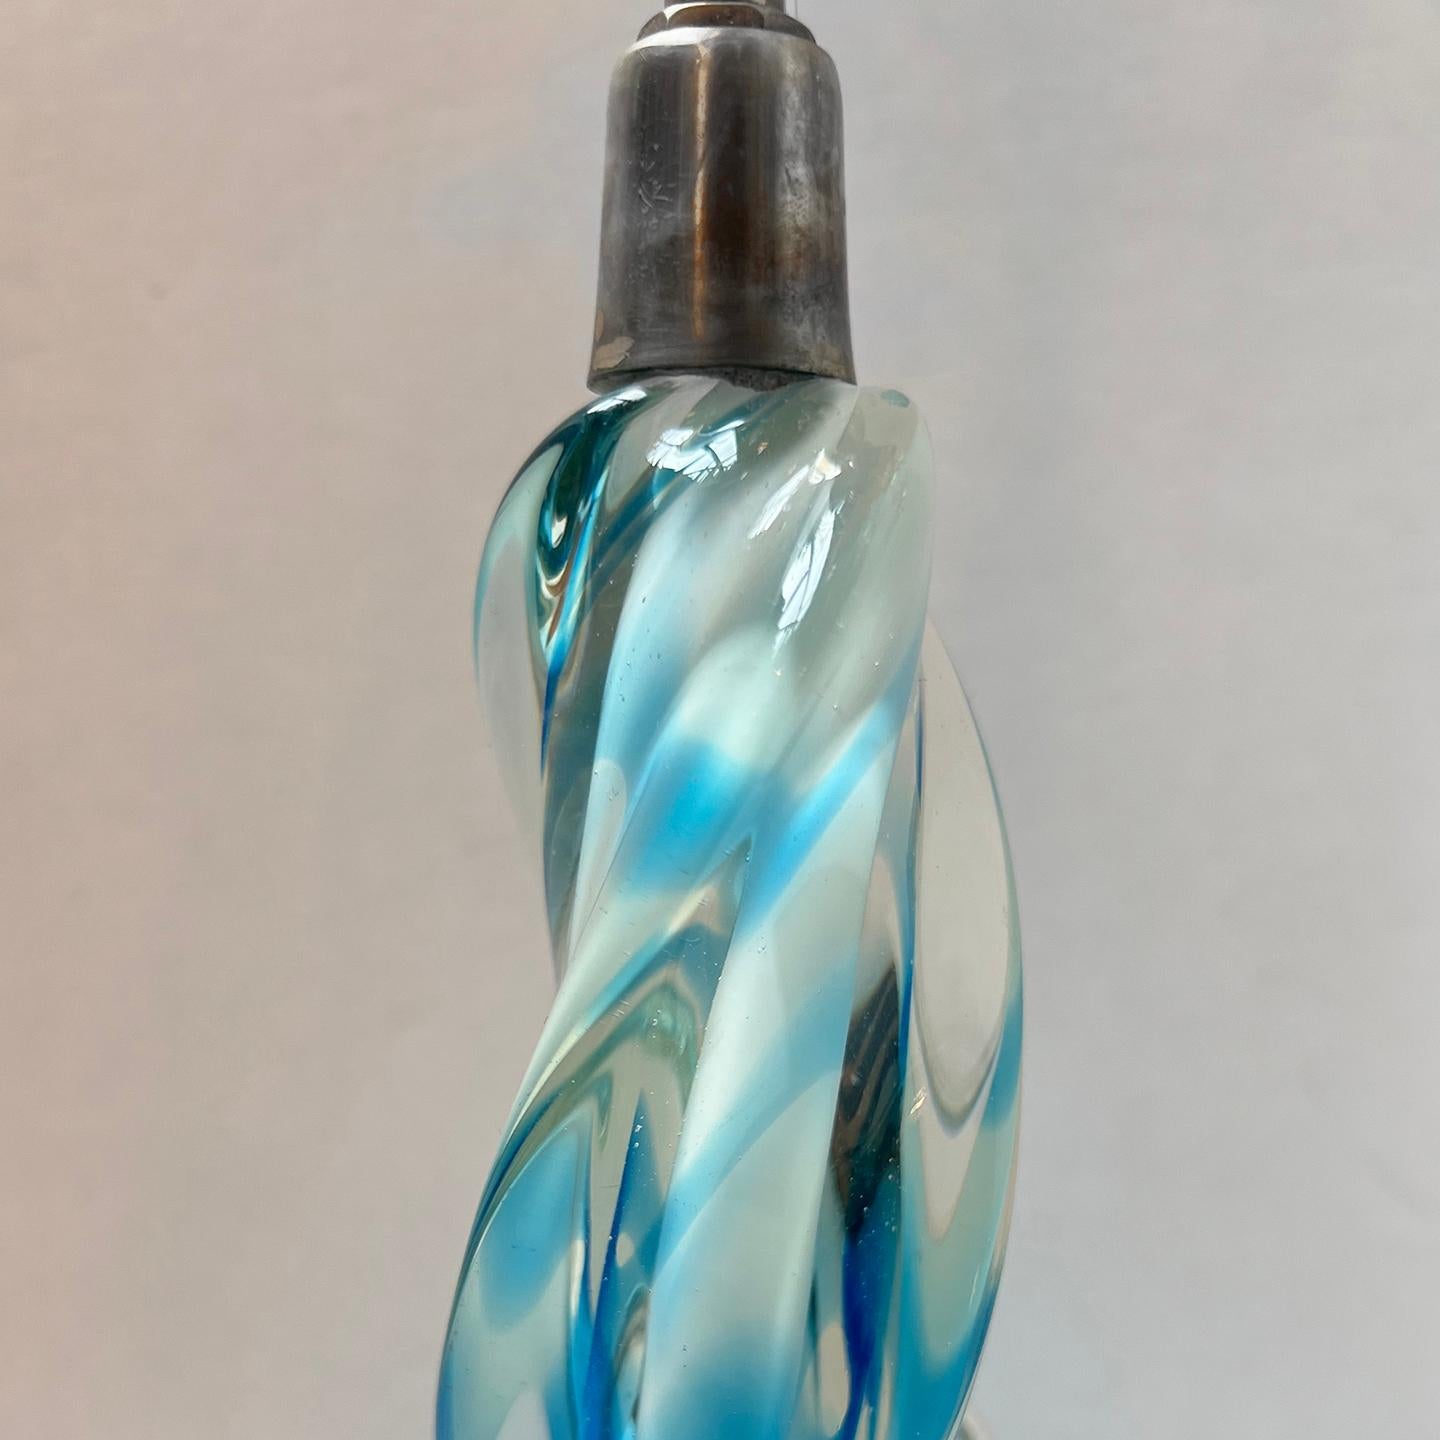 A circa 1920's Italian blue and white Murano glass lamp.

Measurements:
Height of body: 12.5